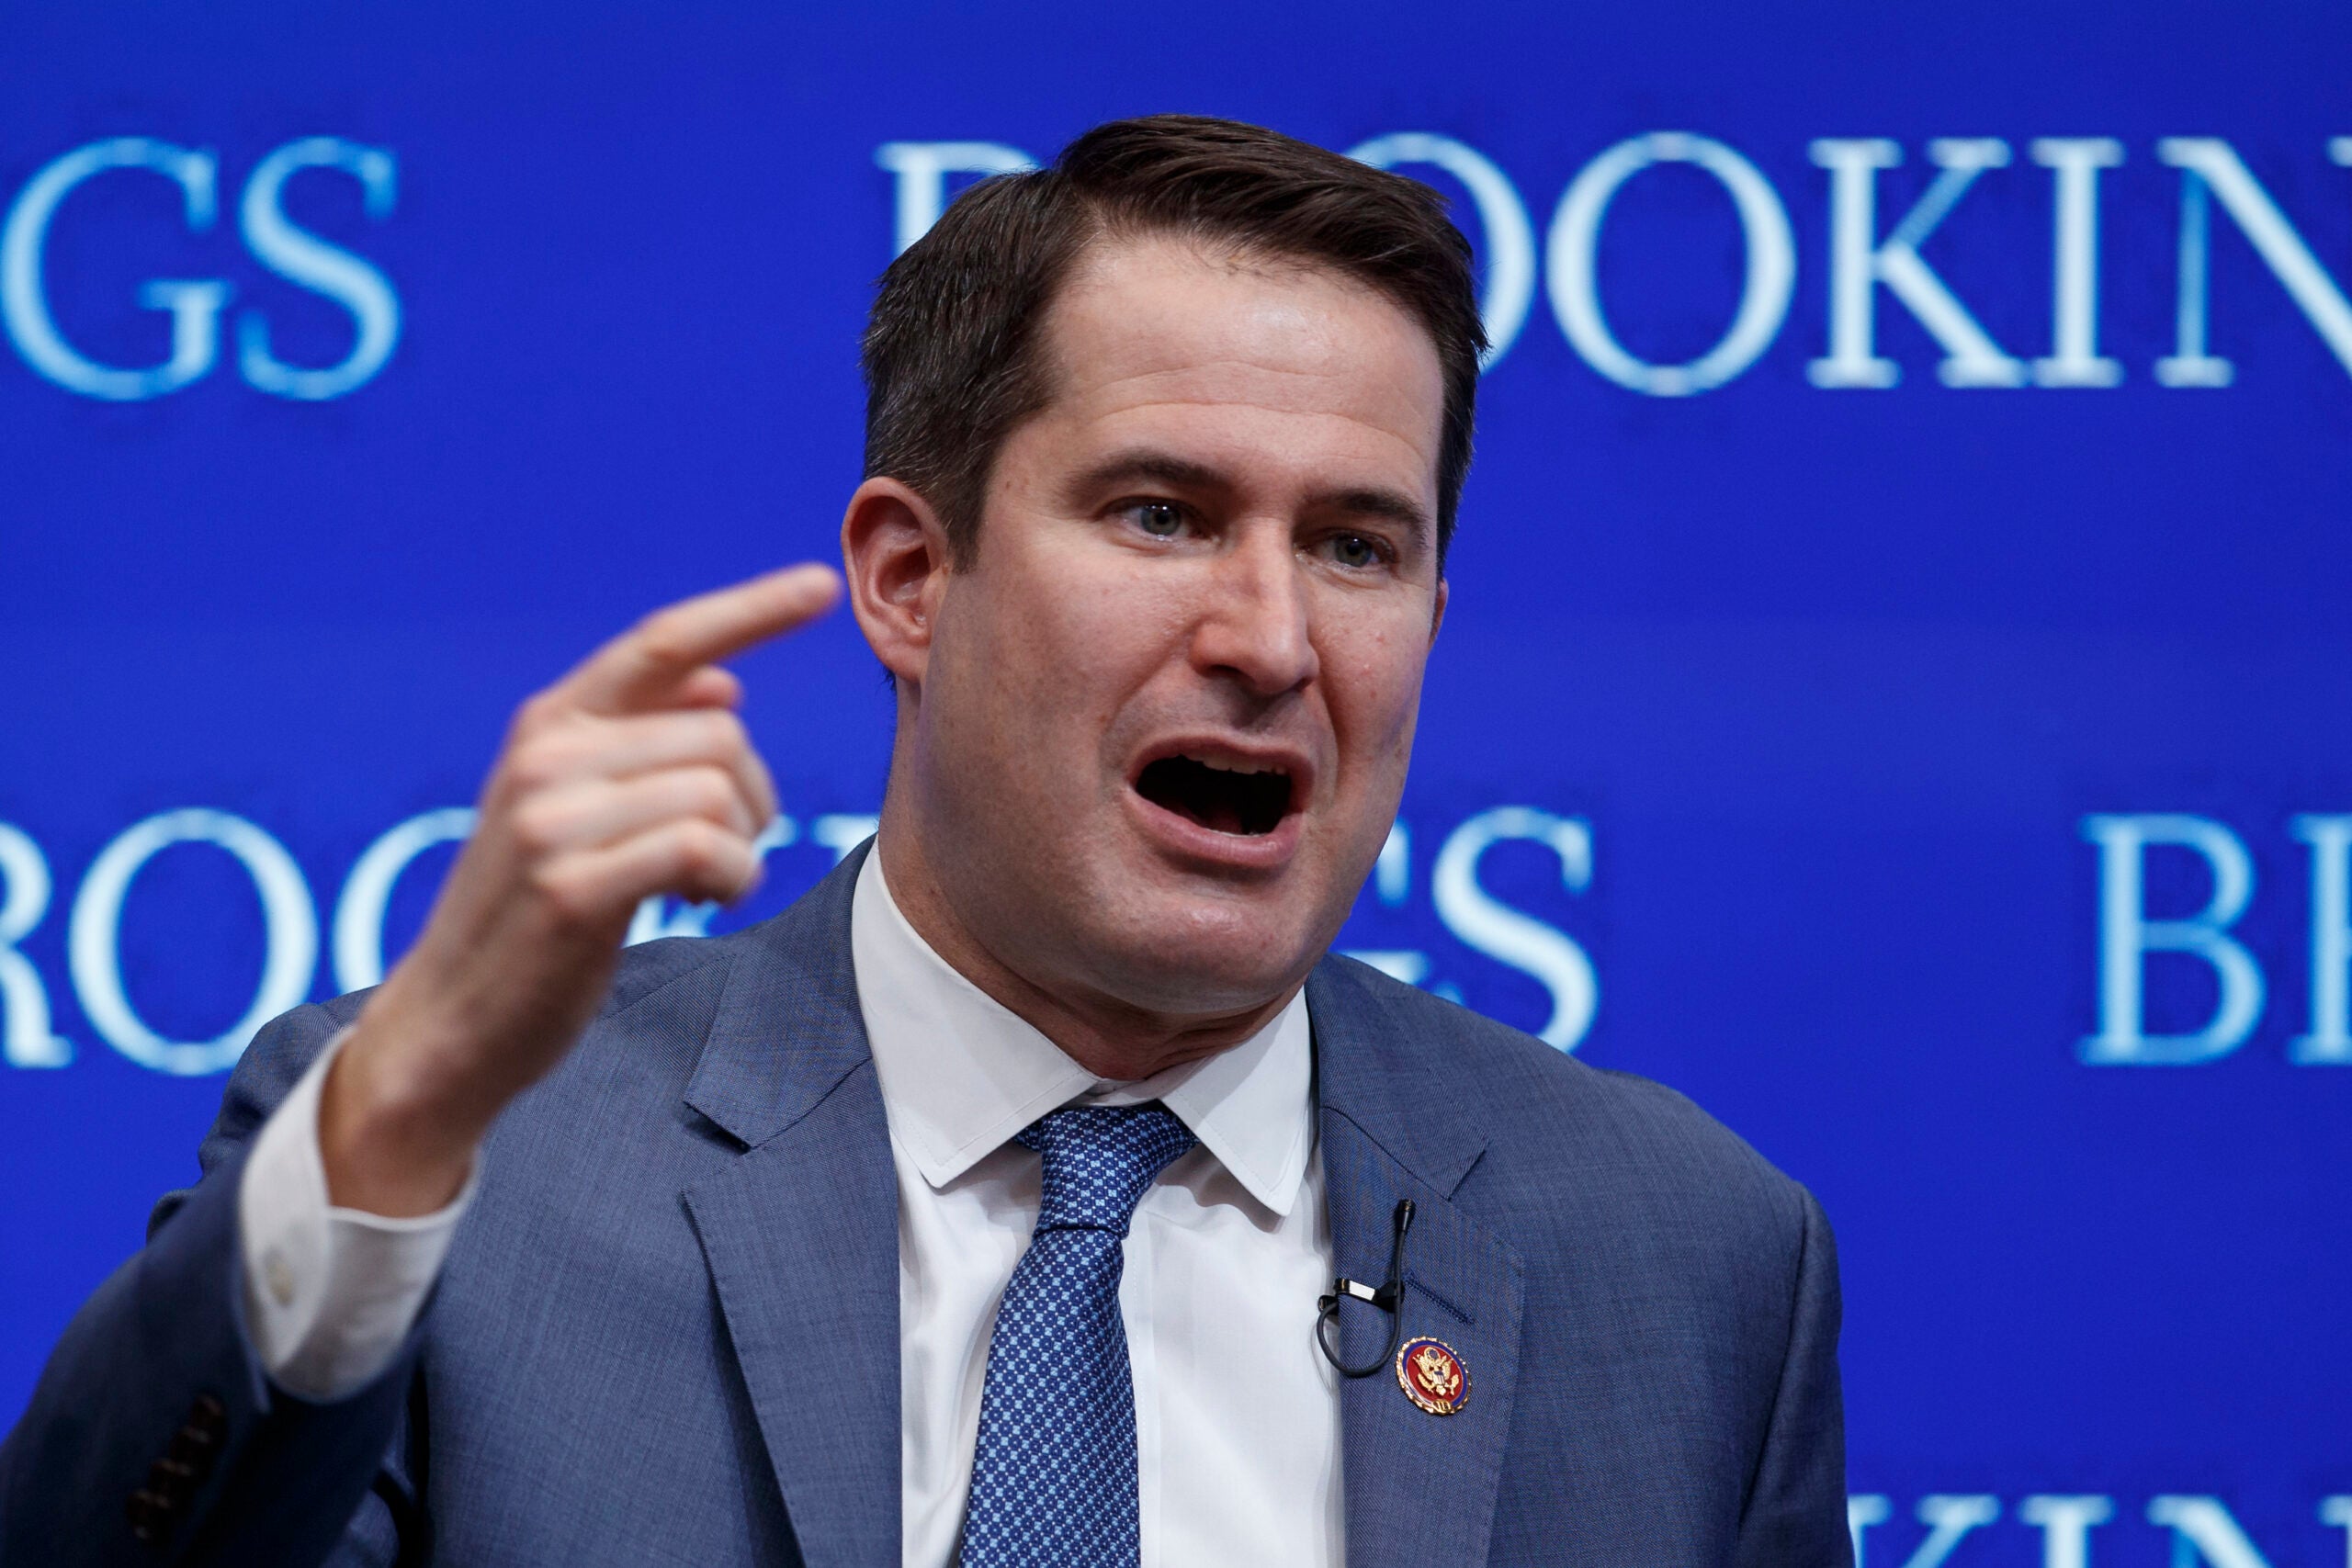 Rep. Seth Moulton, a middle-aged white man with short brown hair, is shown mid-speech, his hand raised in a pointing gesture. He is wearing a blue suit and blue tie.